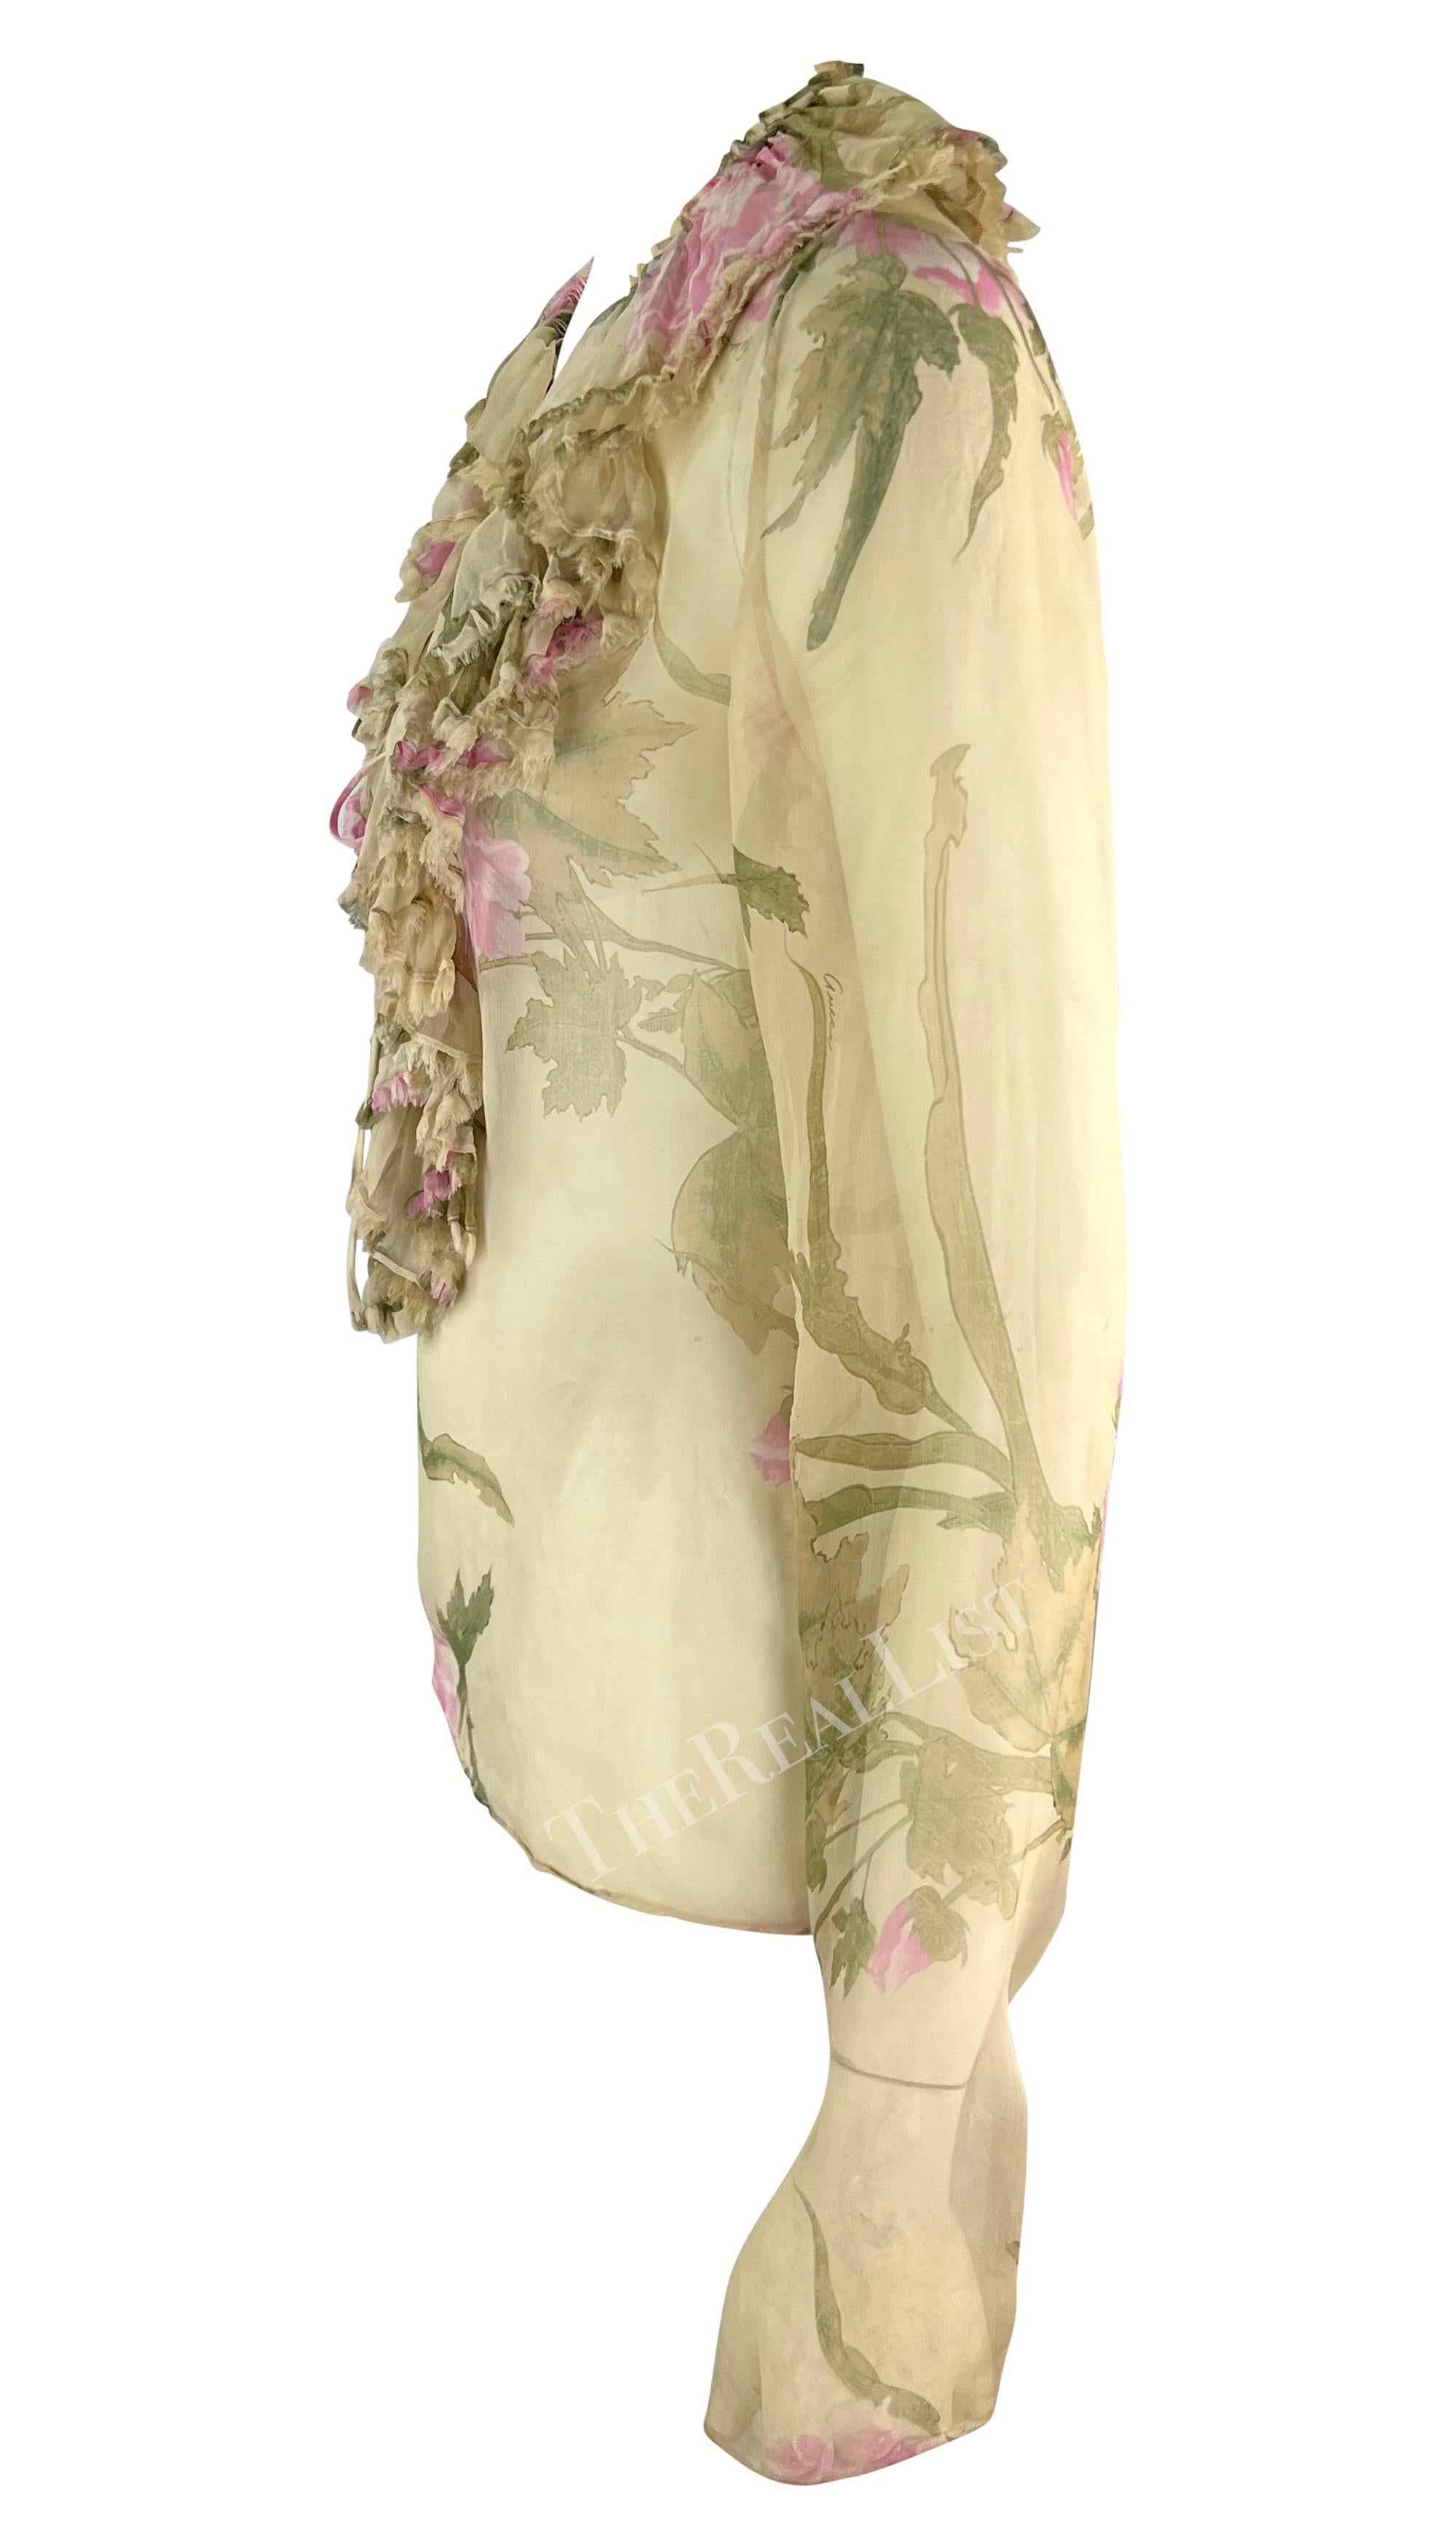 Women's S/S 2003 Gucci by Tom Ford Tan Sheer Floral Ruffle Plunging Top For Sale